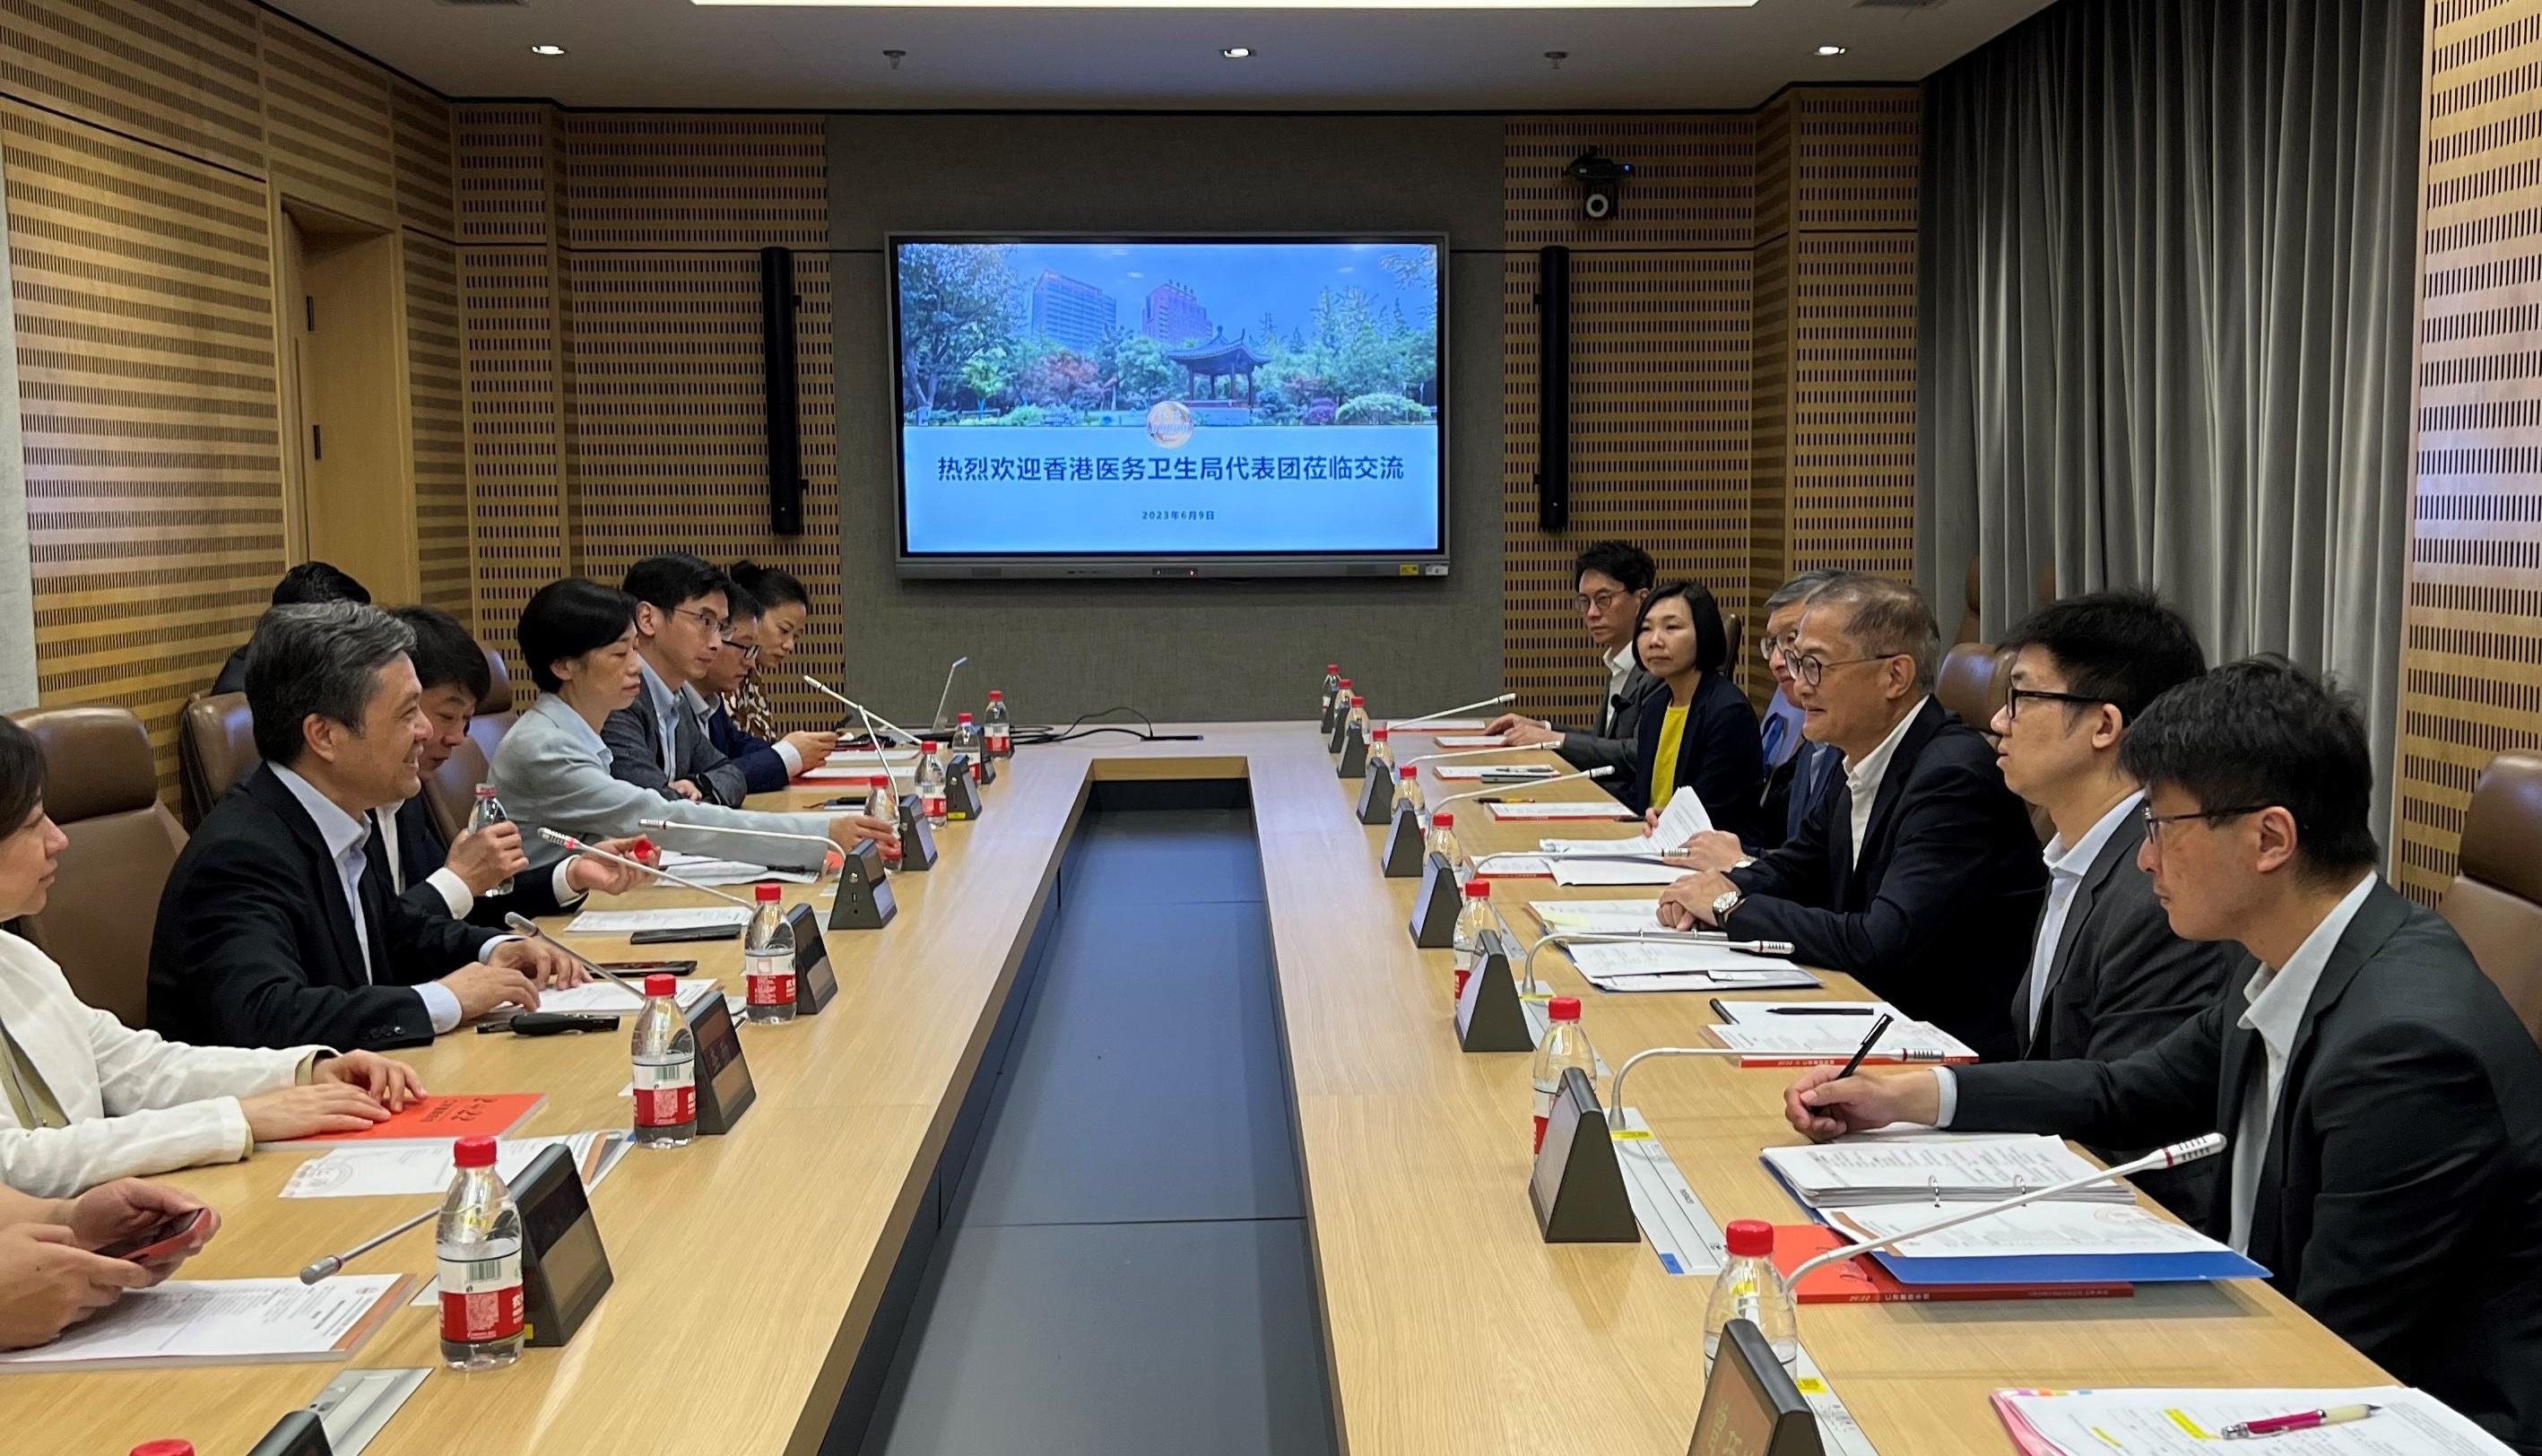 The Secretary for Health, Professor Lo Chung-mau (third right), visits the Renji Hospital affiliated to Shanghai Jiao Tong University School of Medicine and meets with the President and Deputy Party Secretary of the hospital, Mr Xia Qiang (second left), this morning (June 9). The Head of the Health Promotion Branch of the Department of Health, Dr Leung Yiu-hong (first right) also attended.